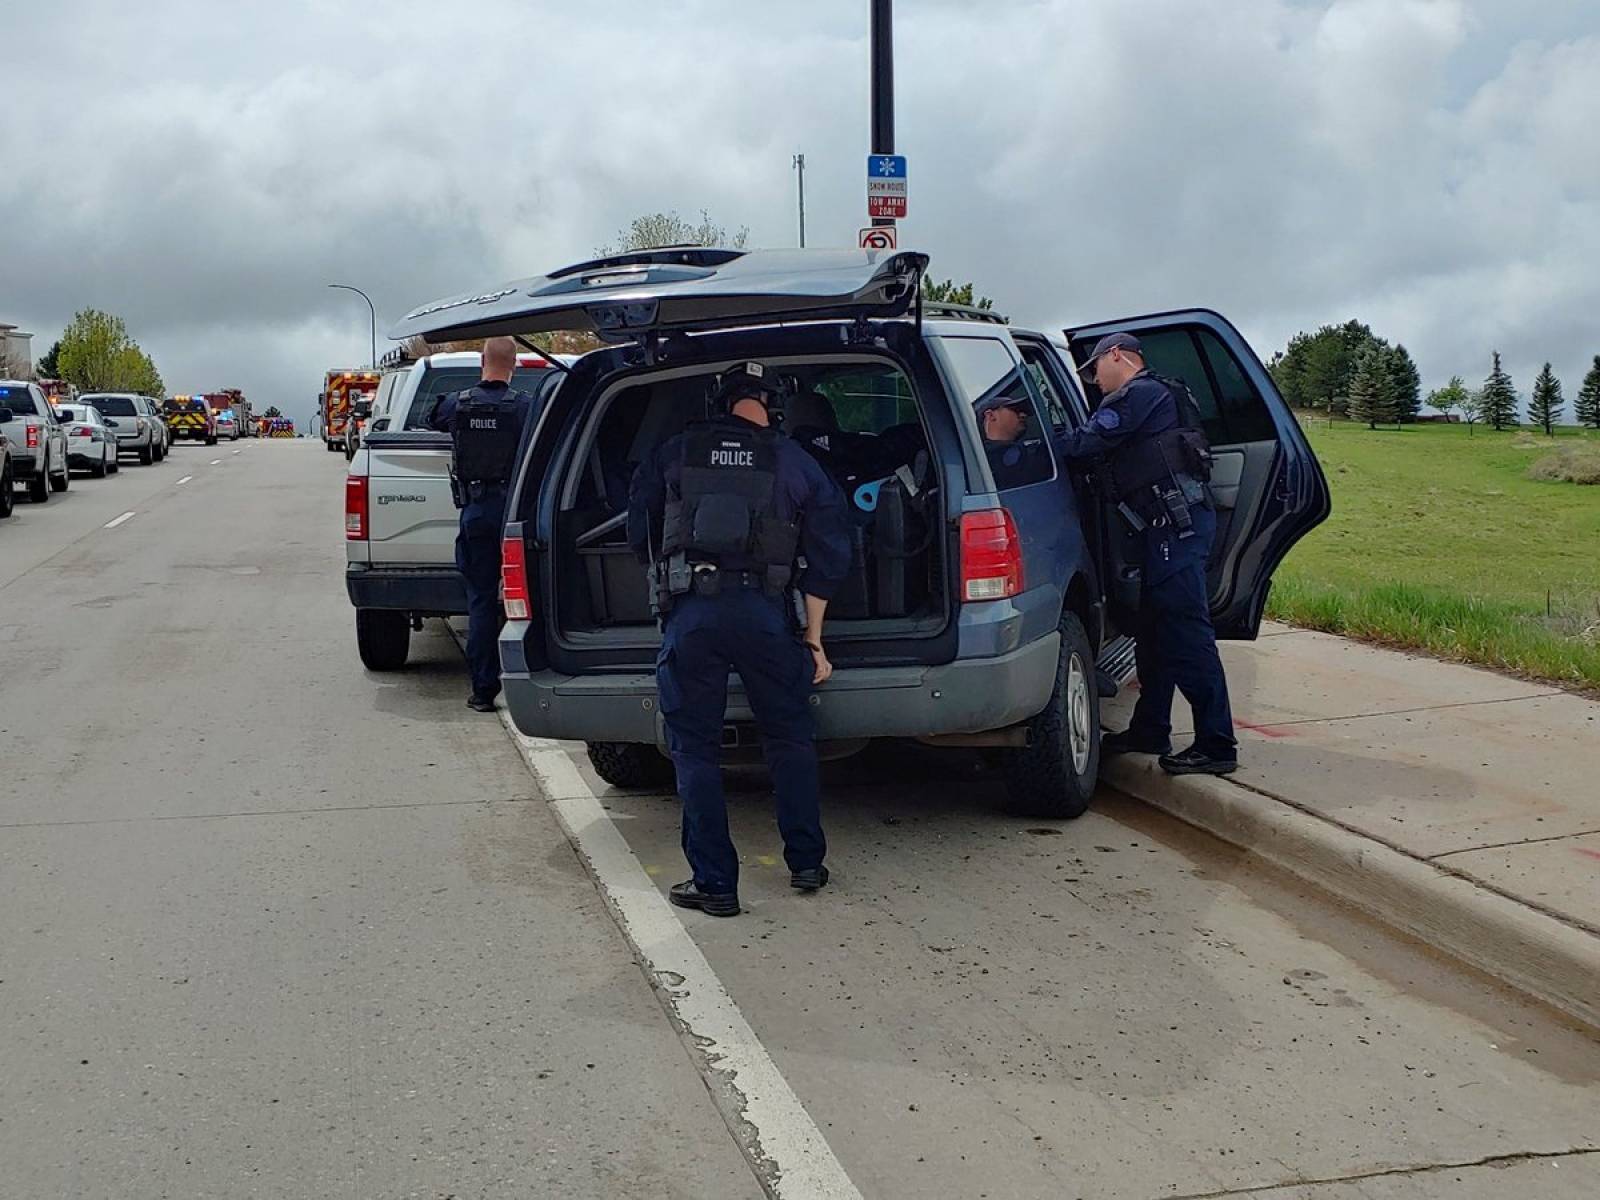 Police officers seen near the STEM School during a shooting incident in Highlands Ranch, Colorado, U.S. in this May 7, 2019 image obtained via social media.